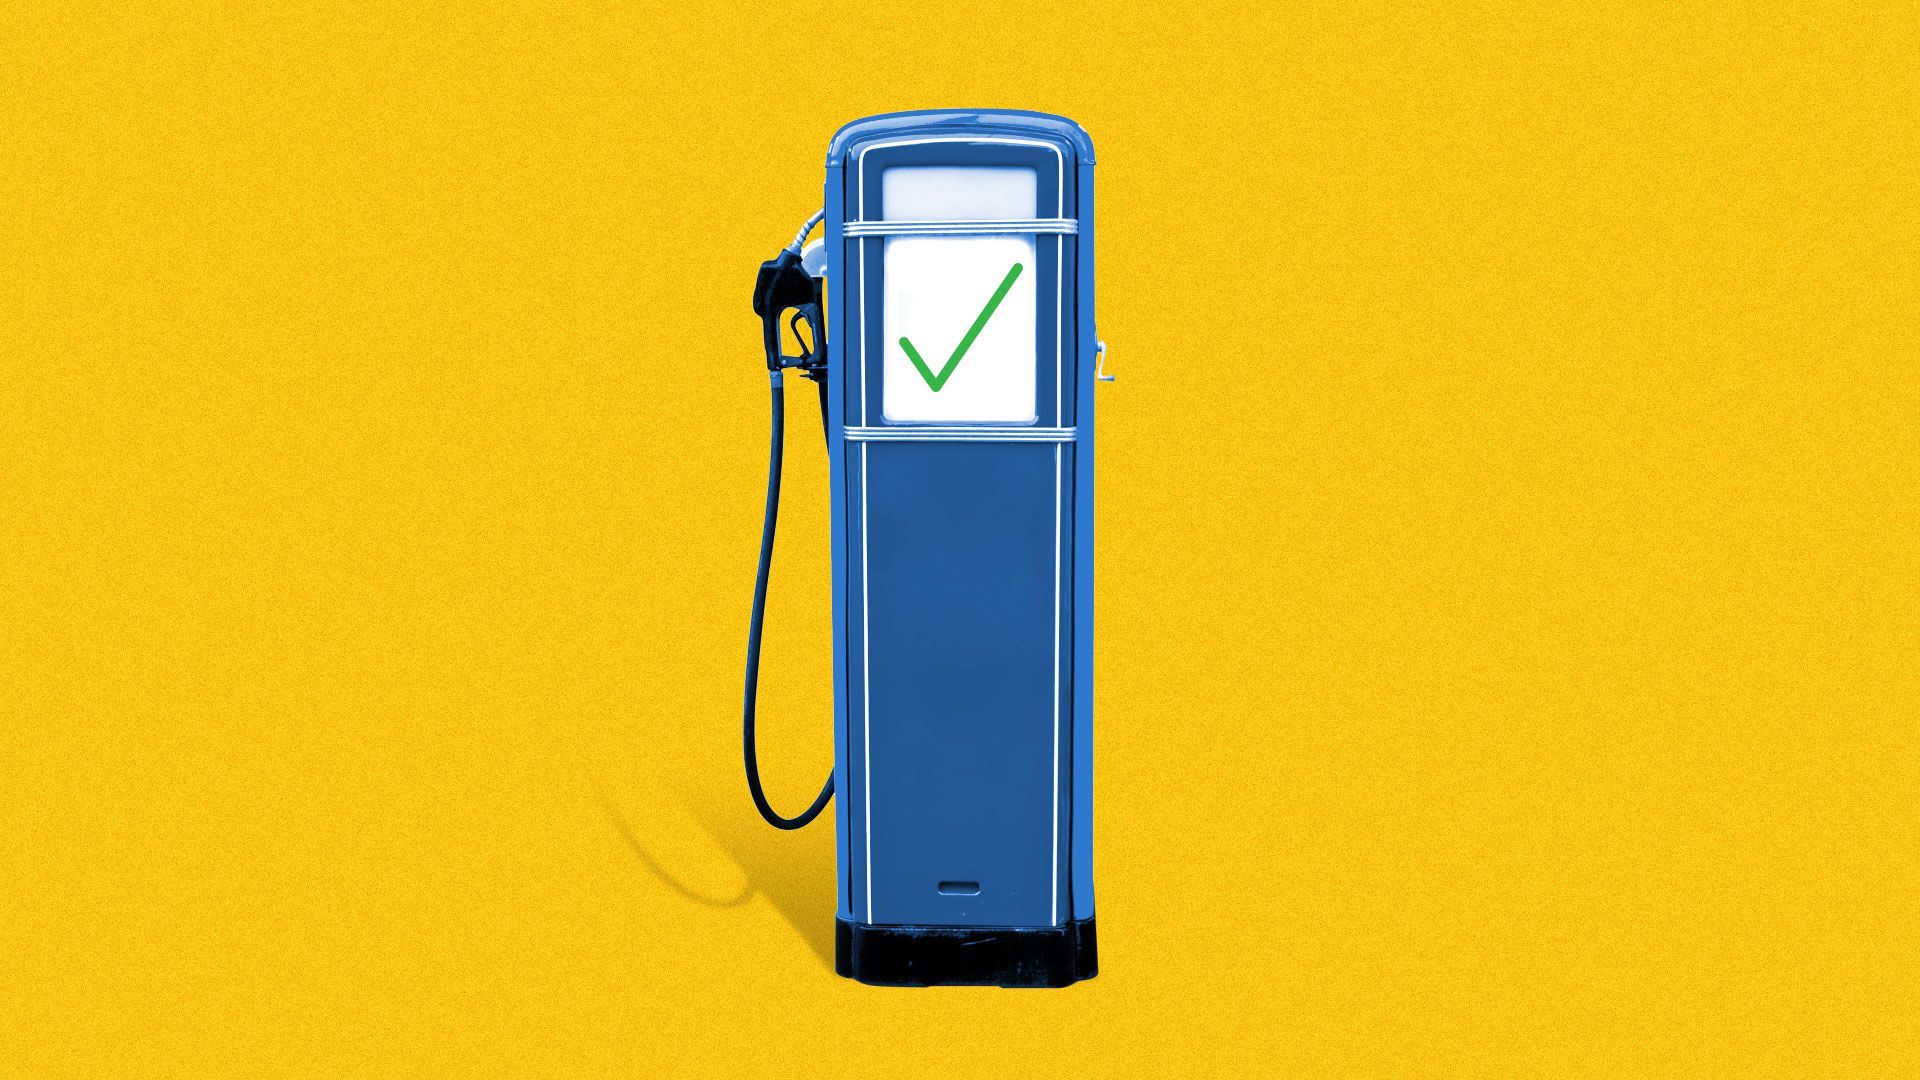 Illustration of a gas pump with a green check mark on it